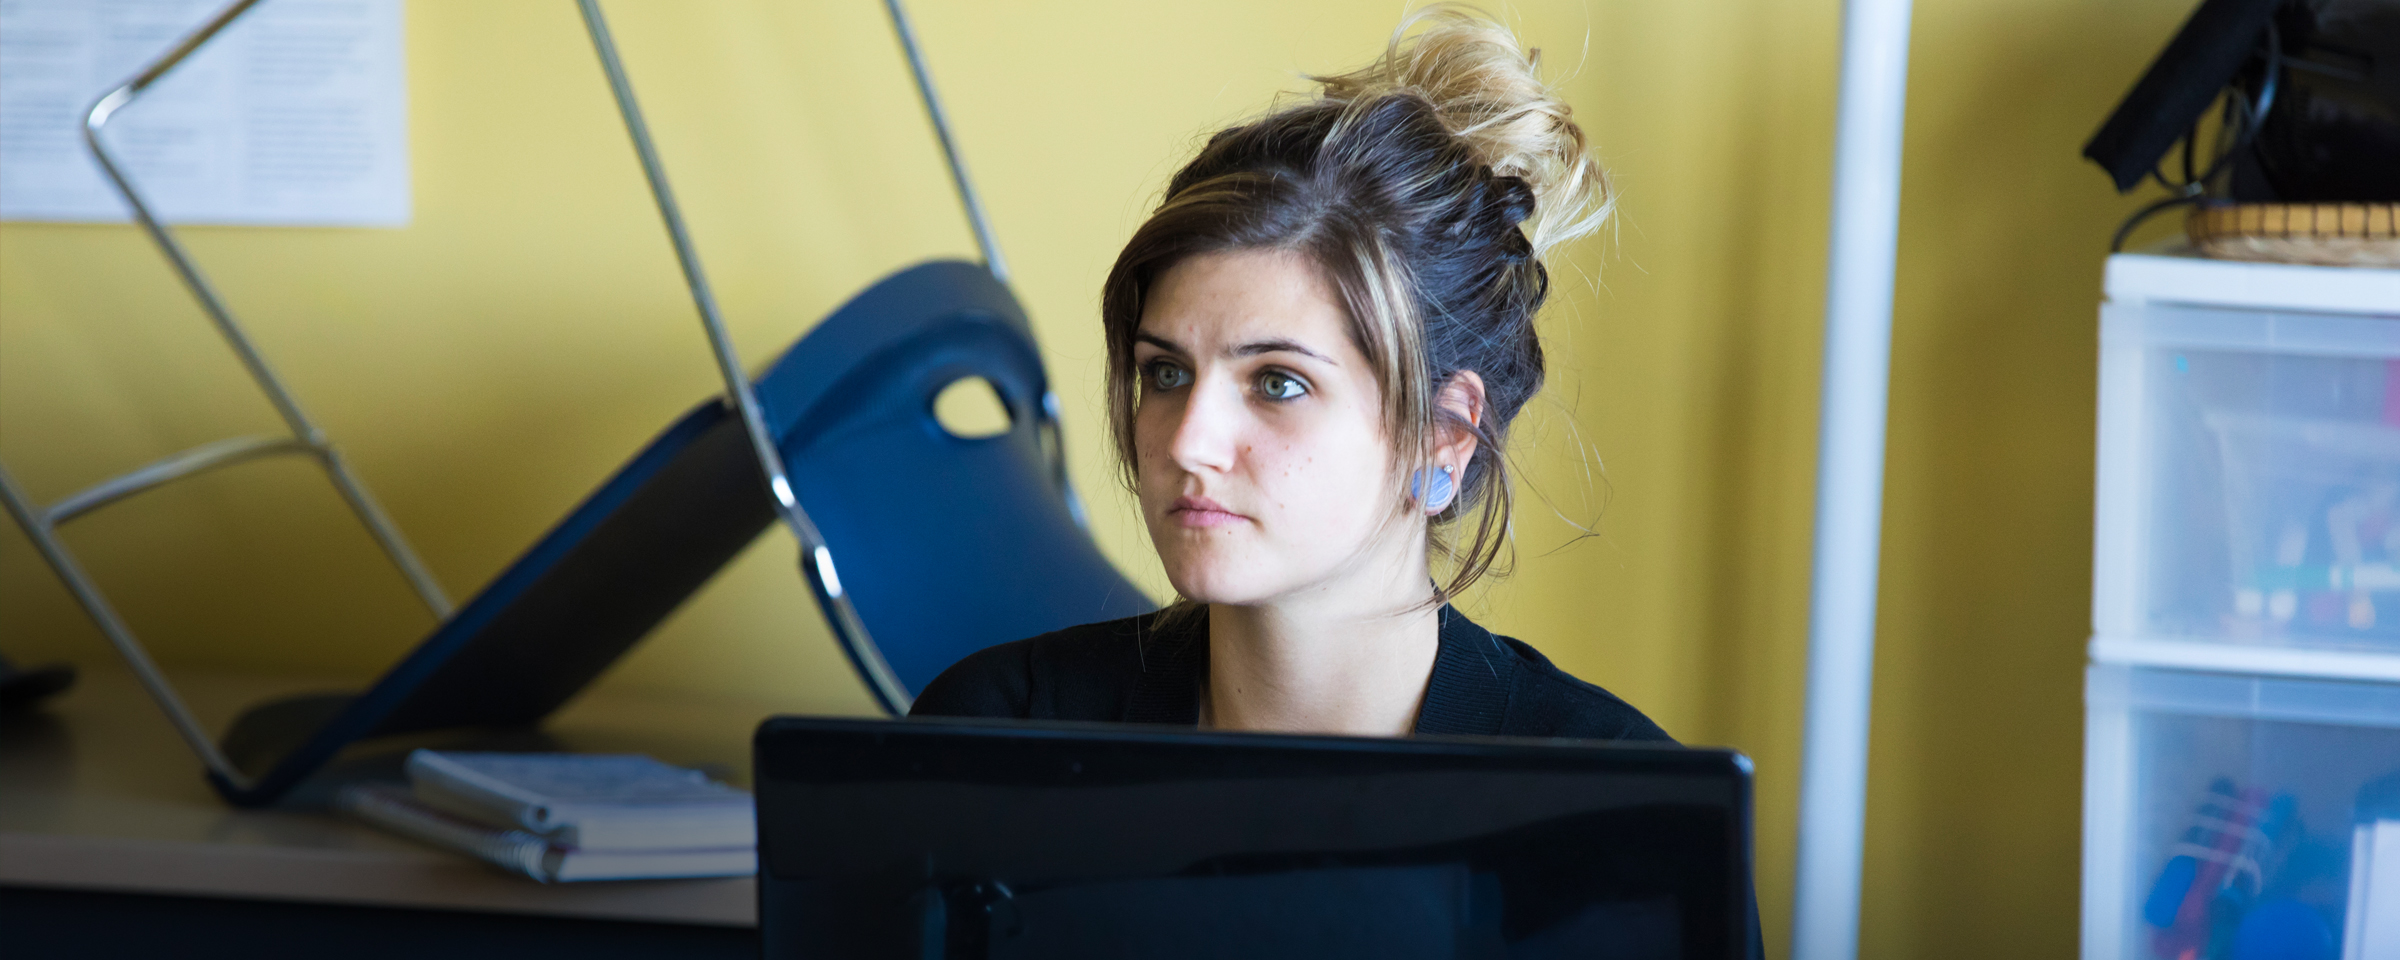 Girl sitting behind computer monitor in classroom